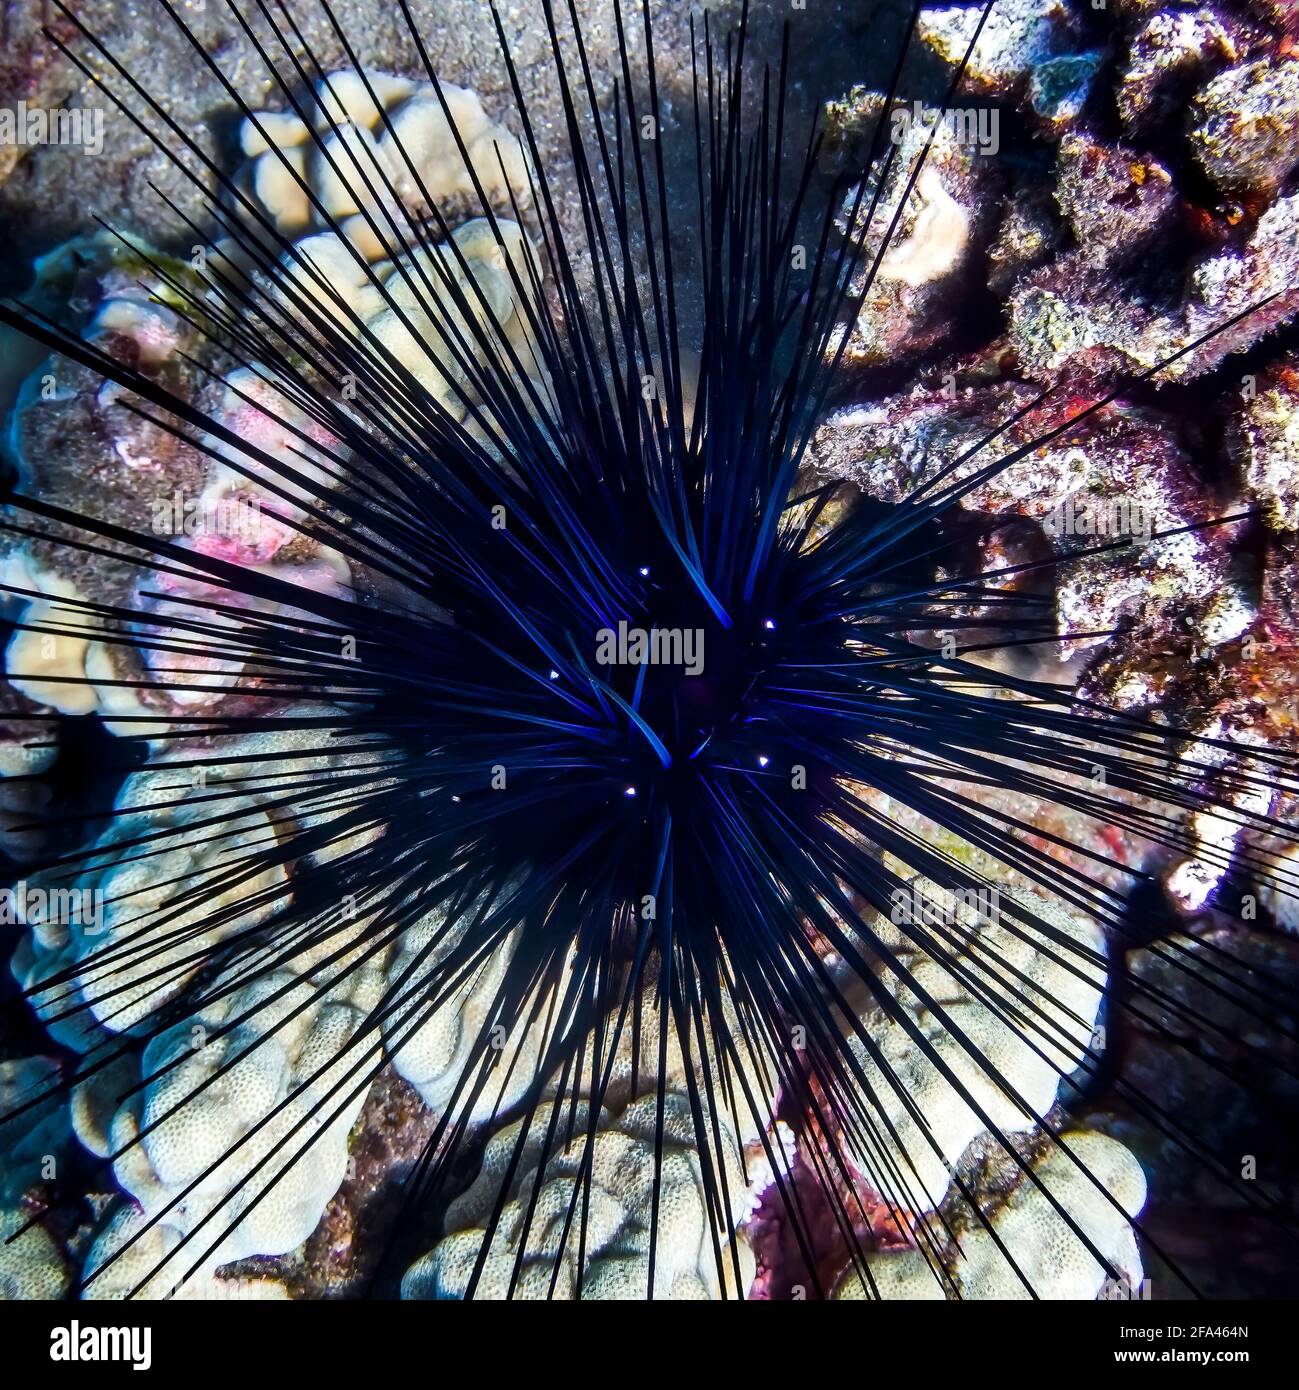 Blue black spiny sea urchin from top down showing neon color and design in center.  Artistic and abstract nature image. Stock Photo